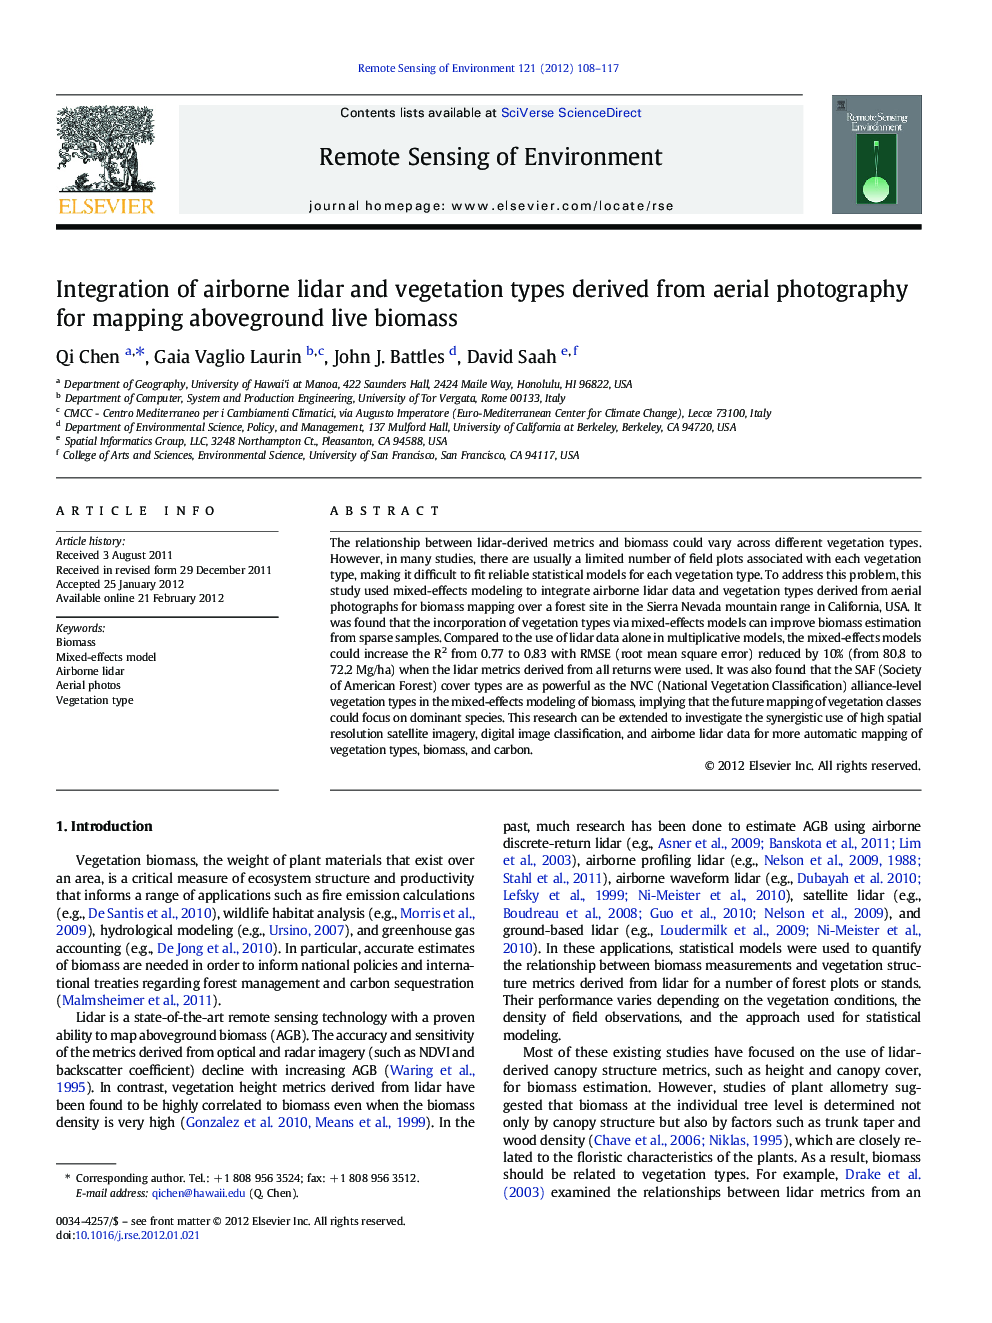 Integration of airborne lidar and vegetation types derived from aerial photography for mapping aboveground live biomass